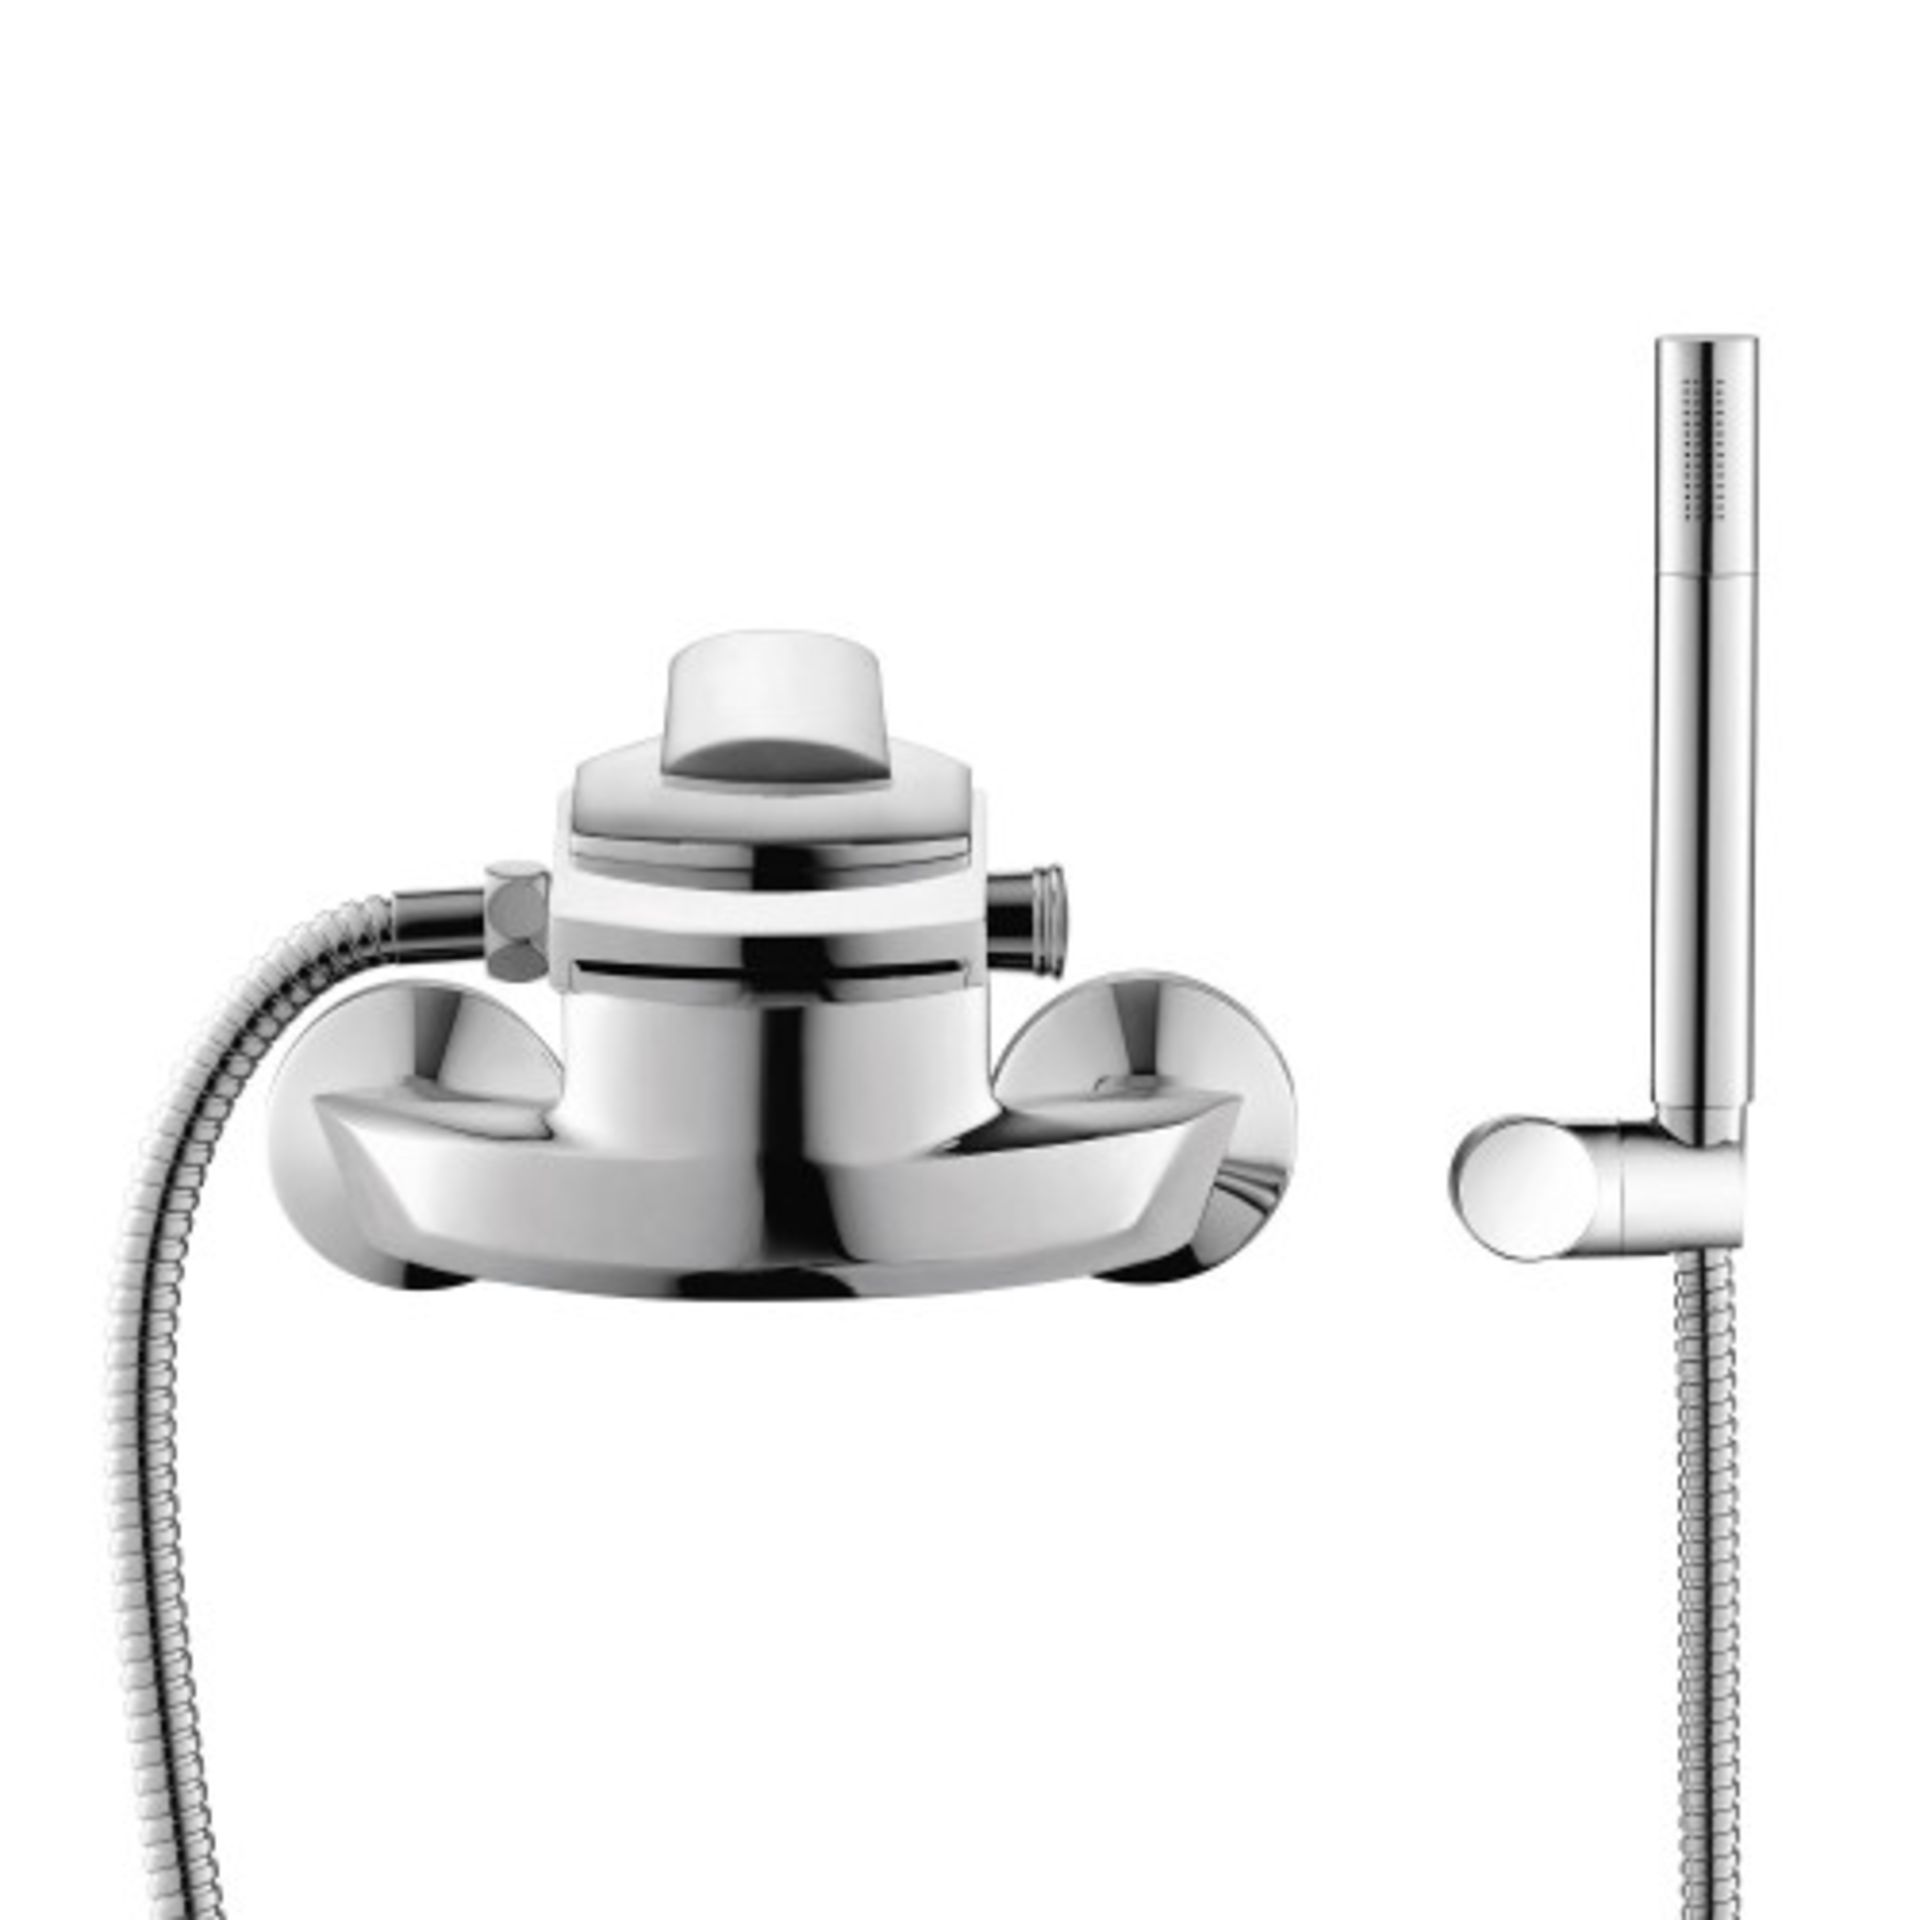 (CE99) OSHI WATERFALL BATH TAP WITH HAND HELD SHOWER HEAD. Stylish new Generation Waterfall Tap... - Image 2 of 3